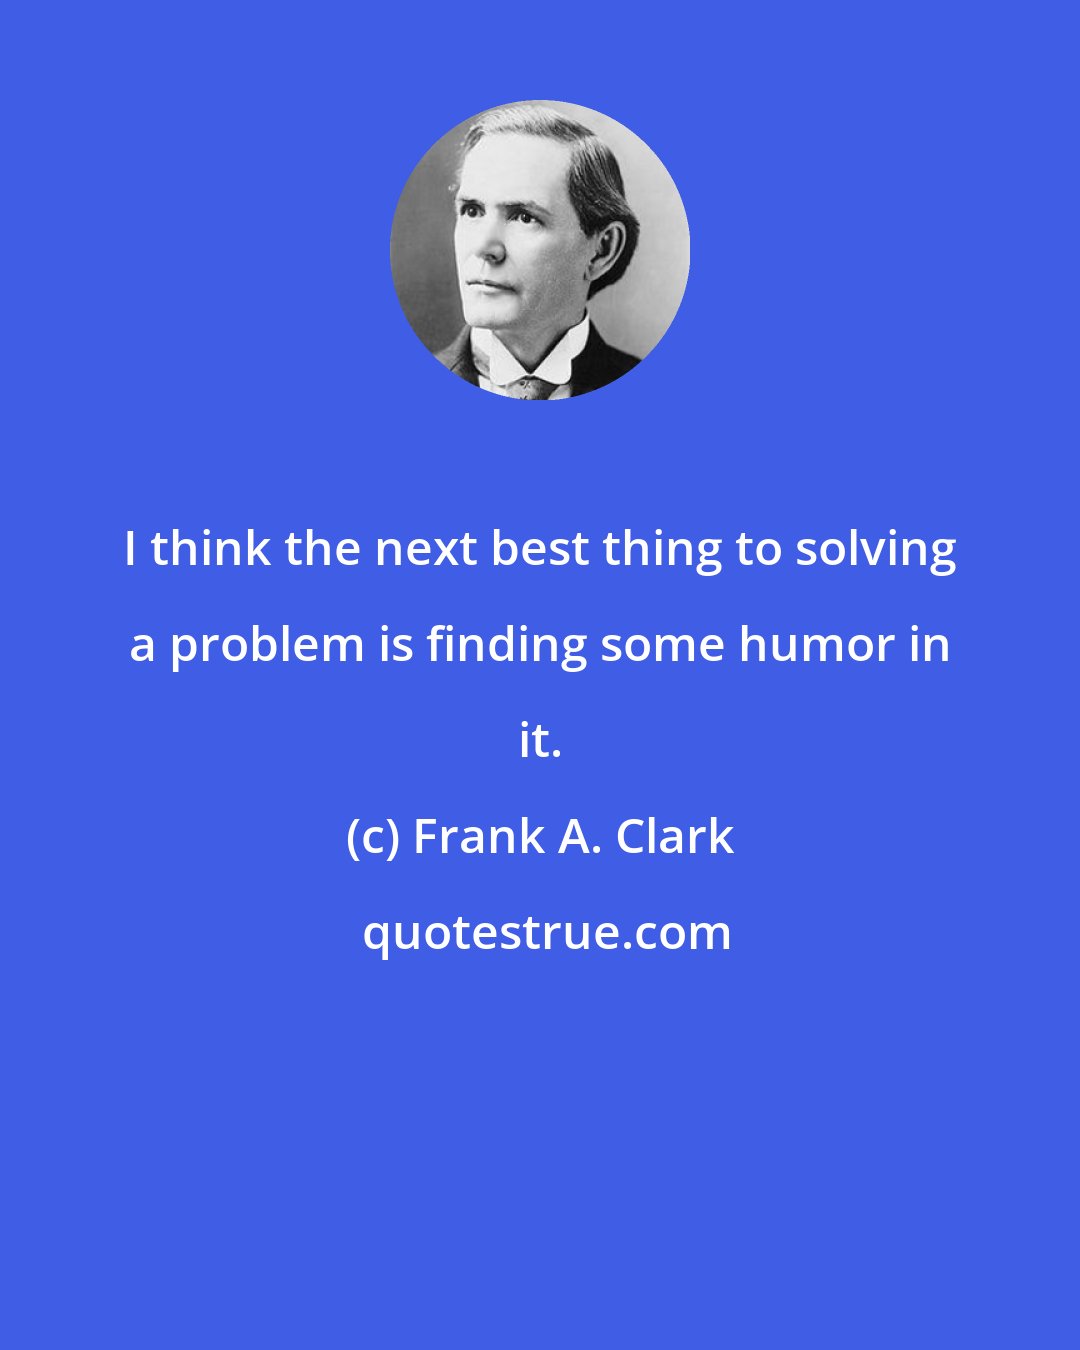 Frank A. Clark: I think the next best thing to solving a problem is finding some humor in it.